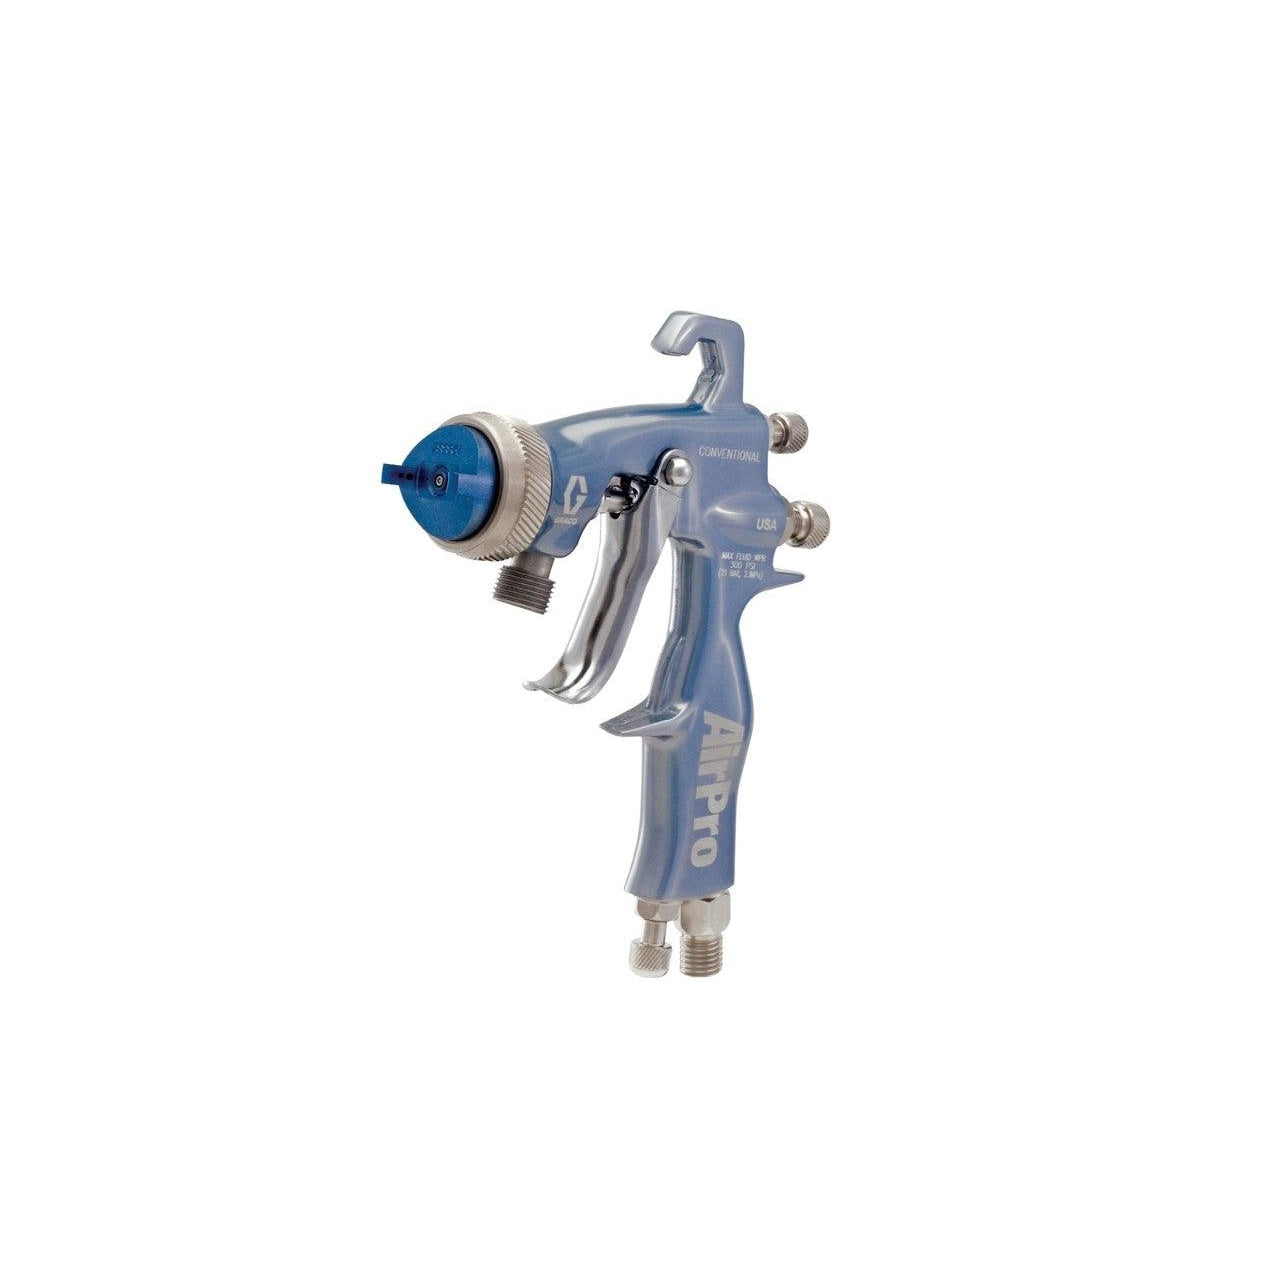 AirPro Air Spray Pressure Feed Gun, Conventional, 0.030 inch (0.8 mm) Nozzle, for Wood Applications